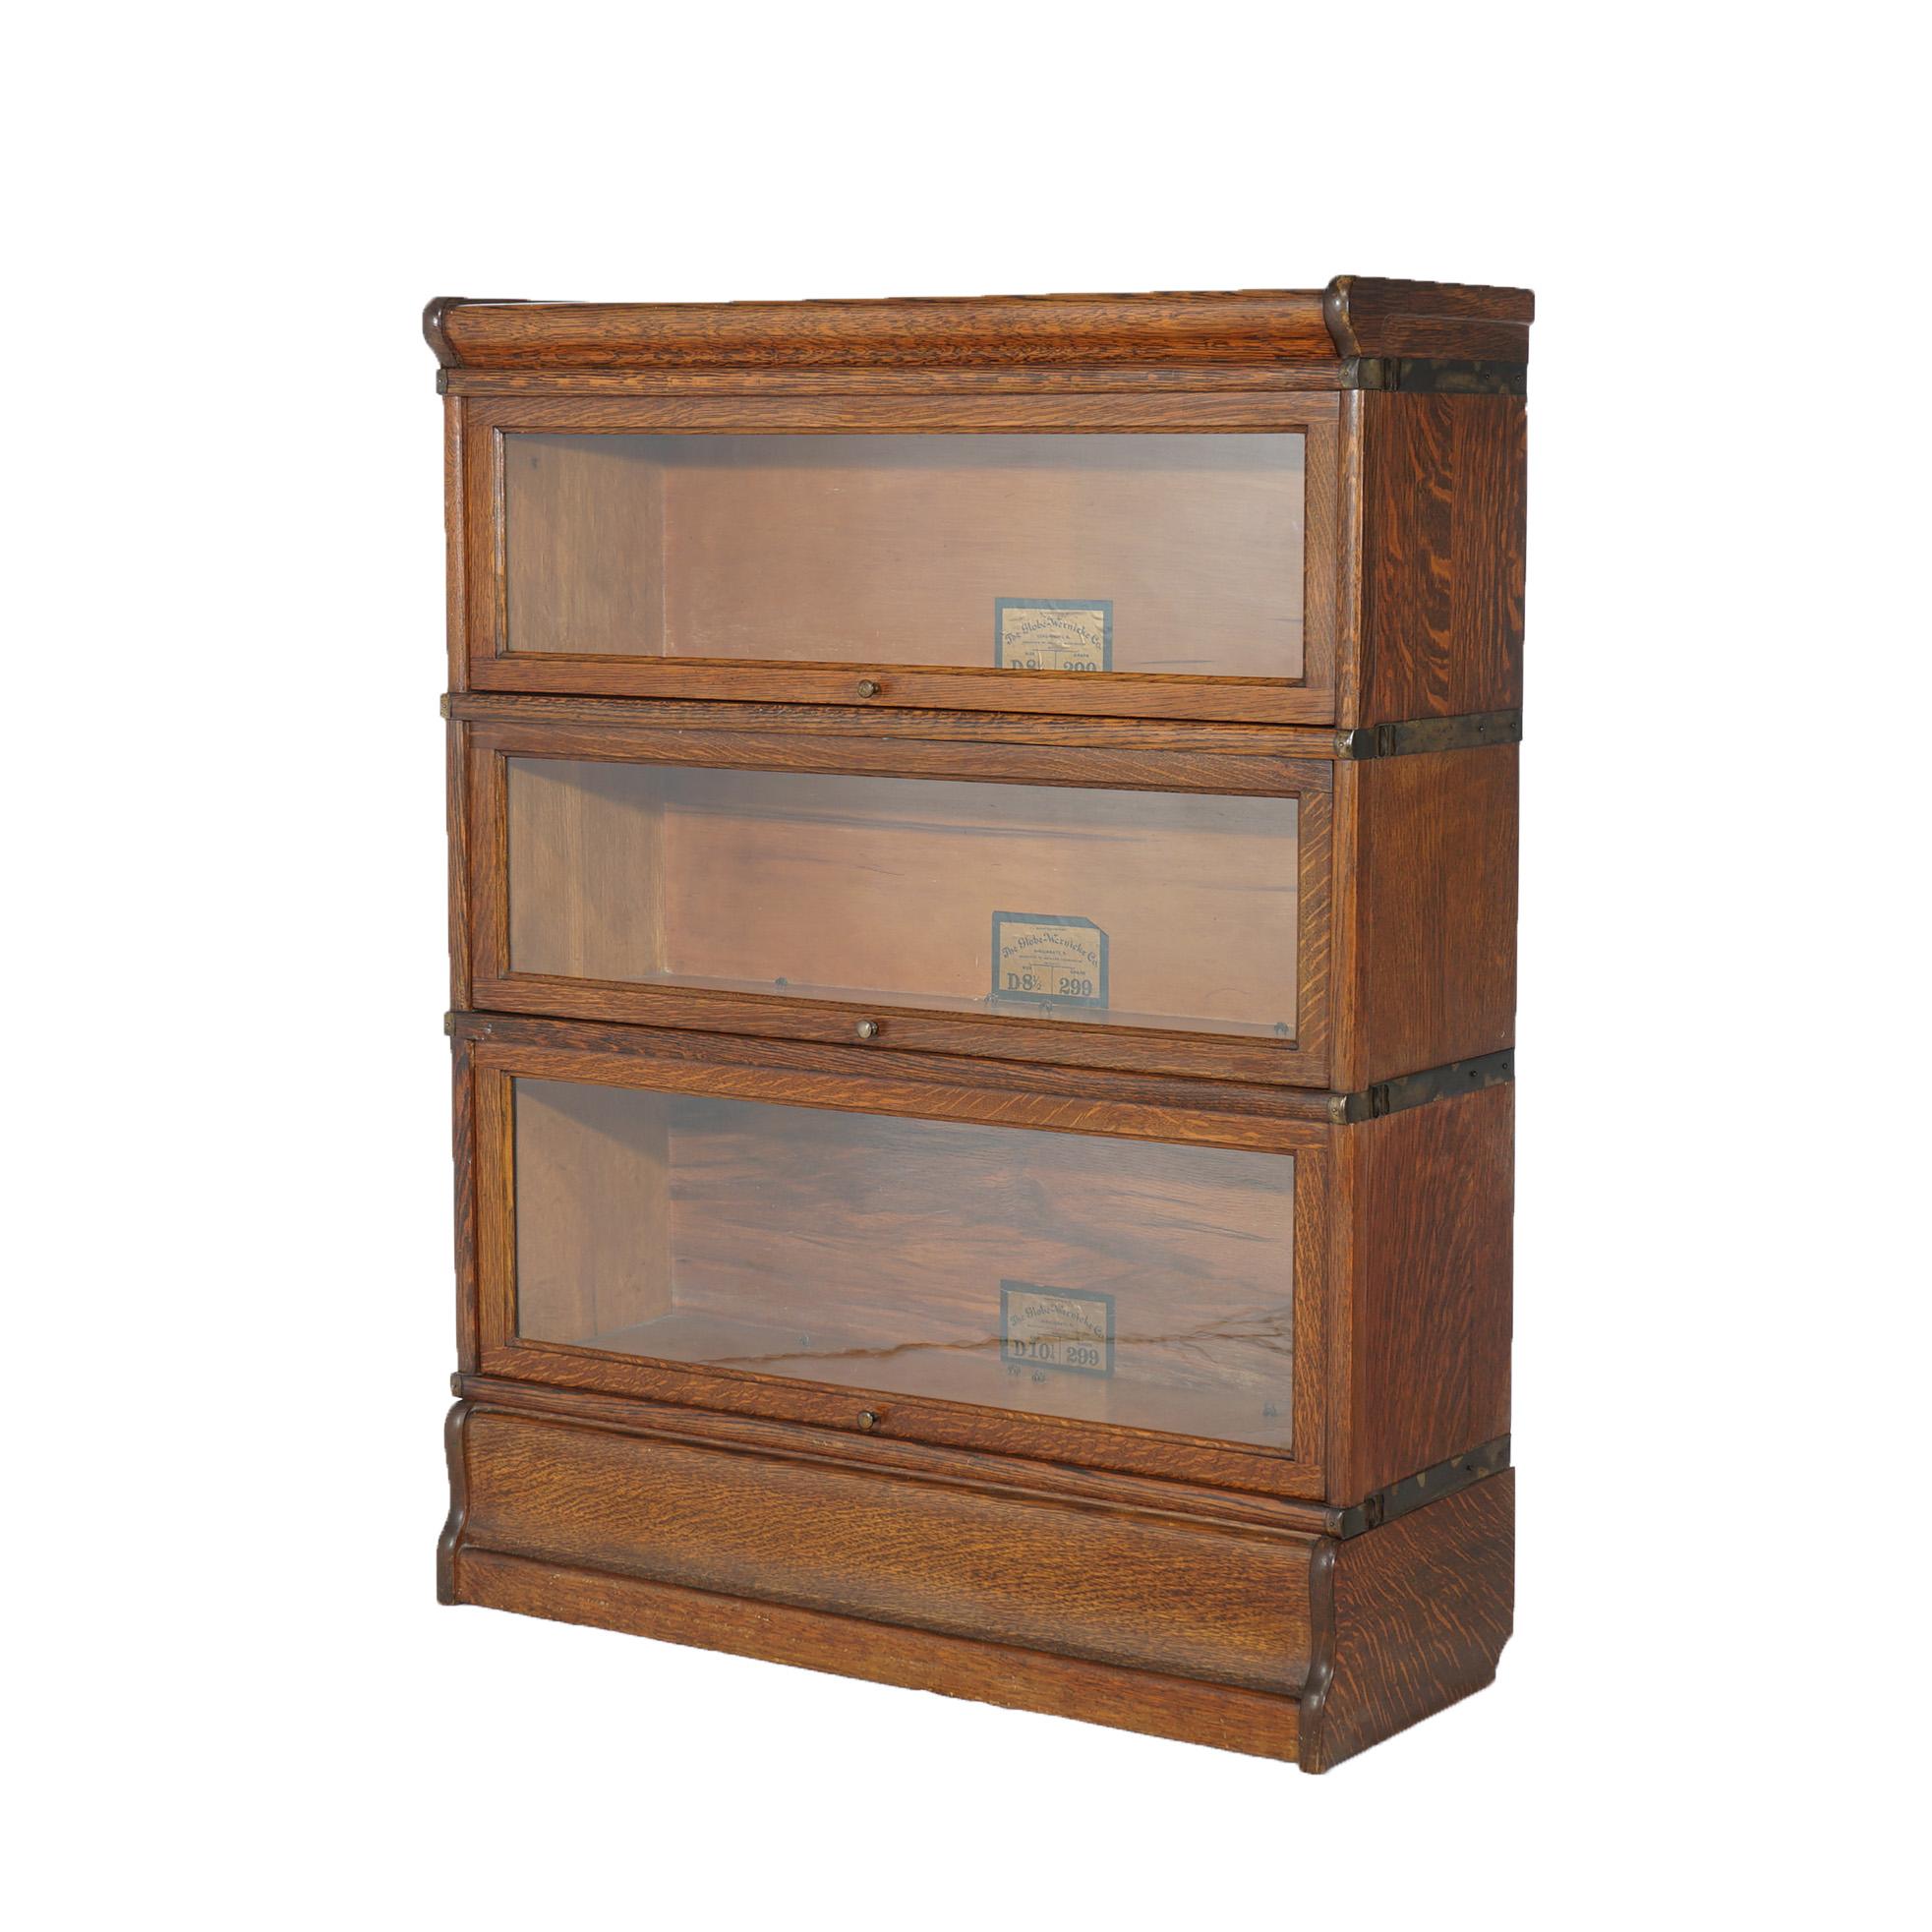 An antique Arts and Crafts barrister bookcase by Globe Wernicke offers quarter sawn oak construction with three stacks, each having pull-out glass doors, raised on an ogee base; maker labels as photographed; c1910

Measures - 43.5